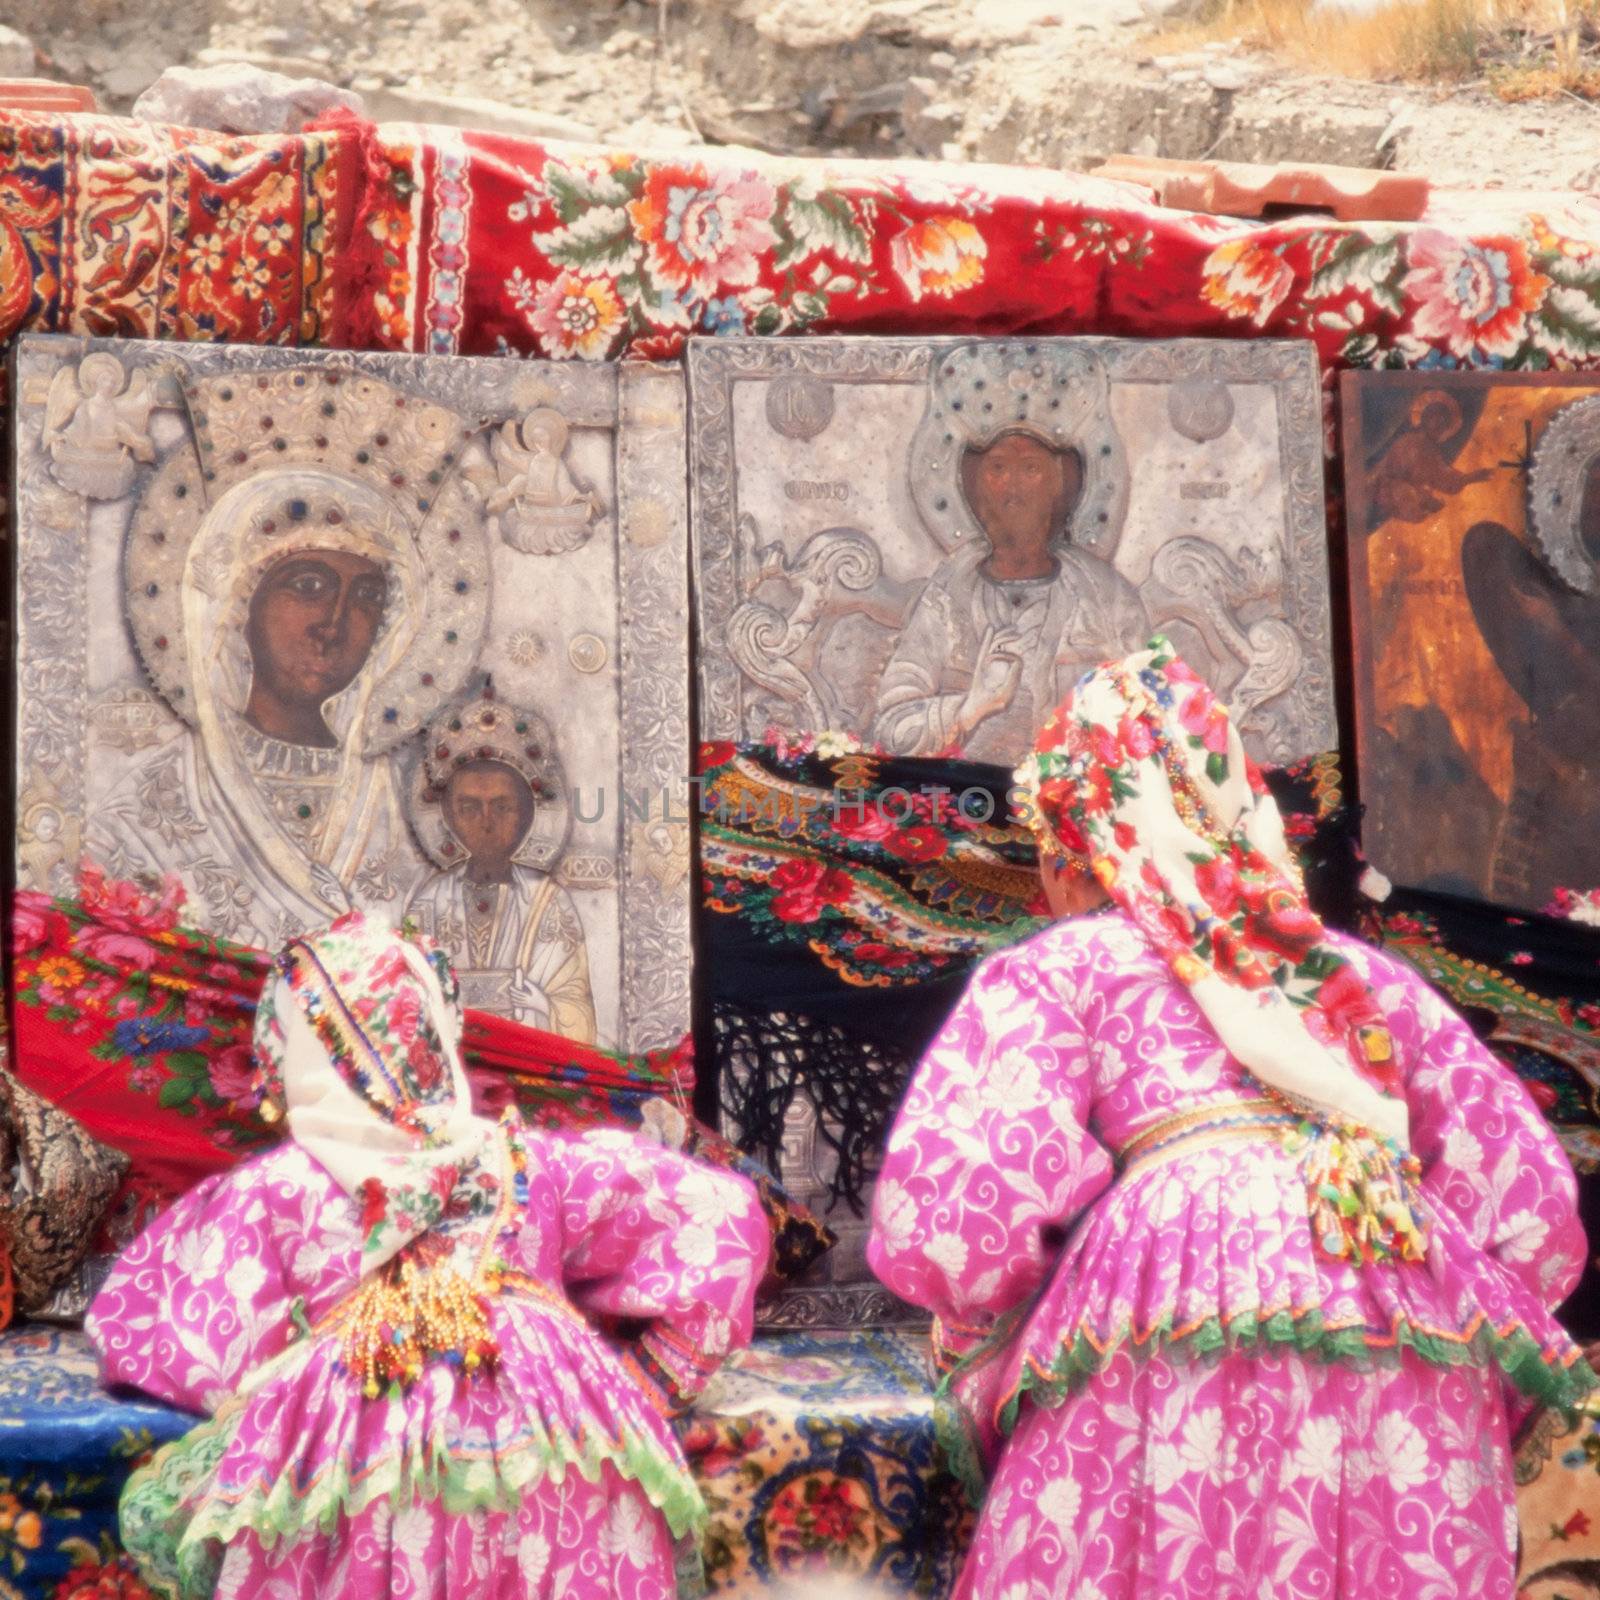 Orthodox Greek Easter Holiday: women in traditional dresses pray in front of icons outside the church.